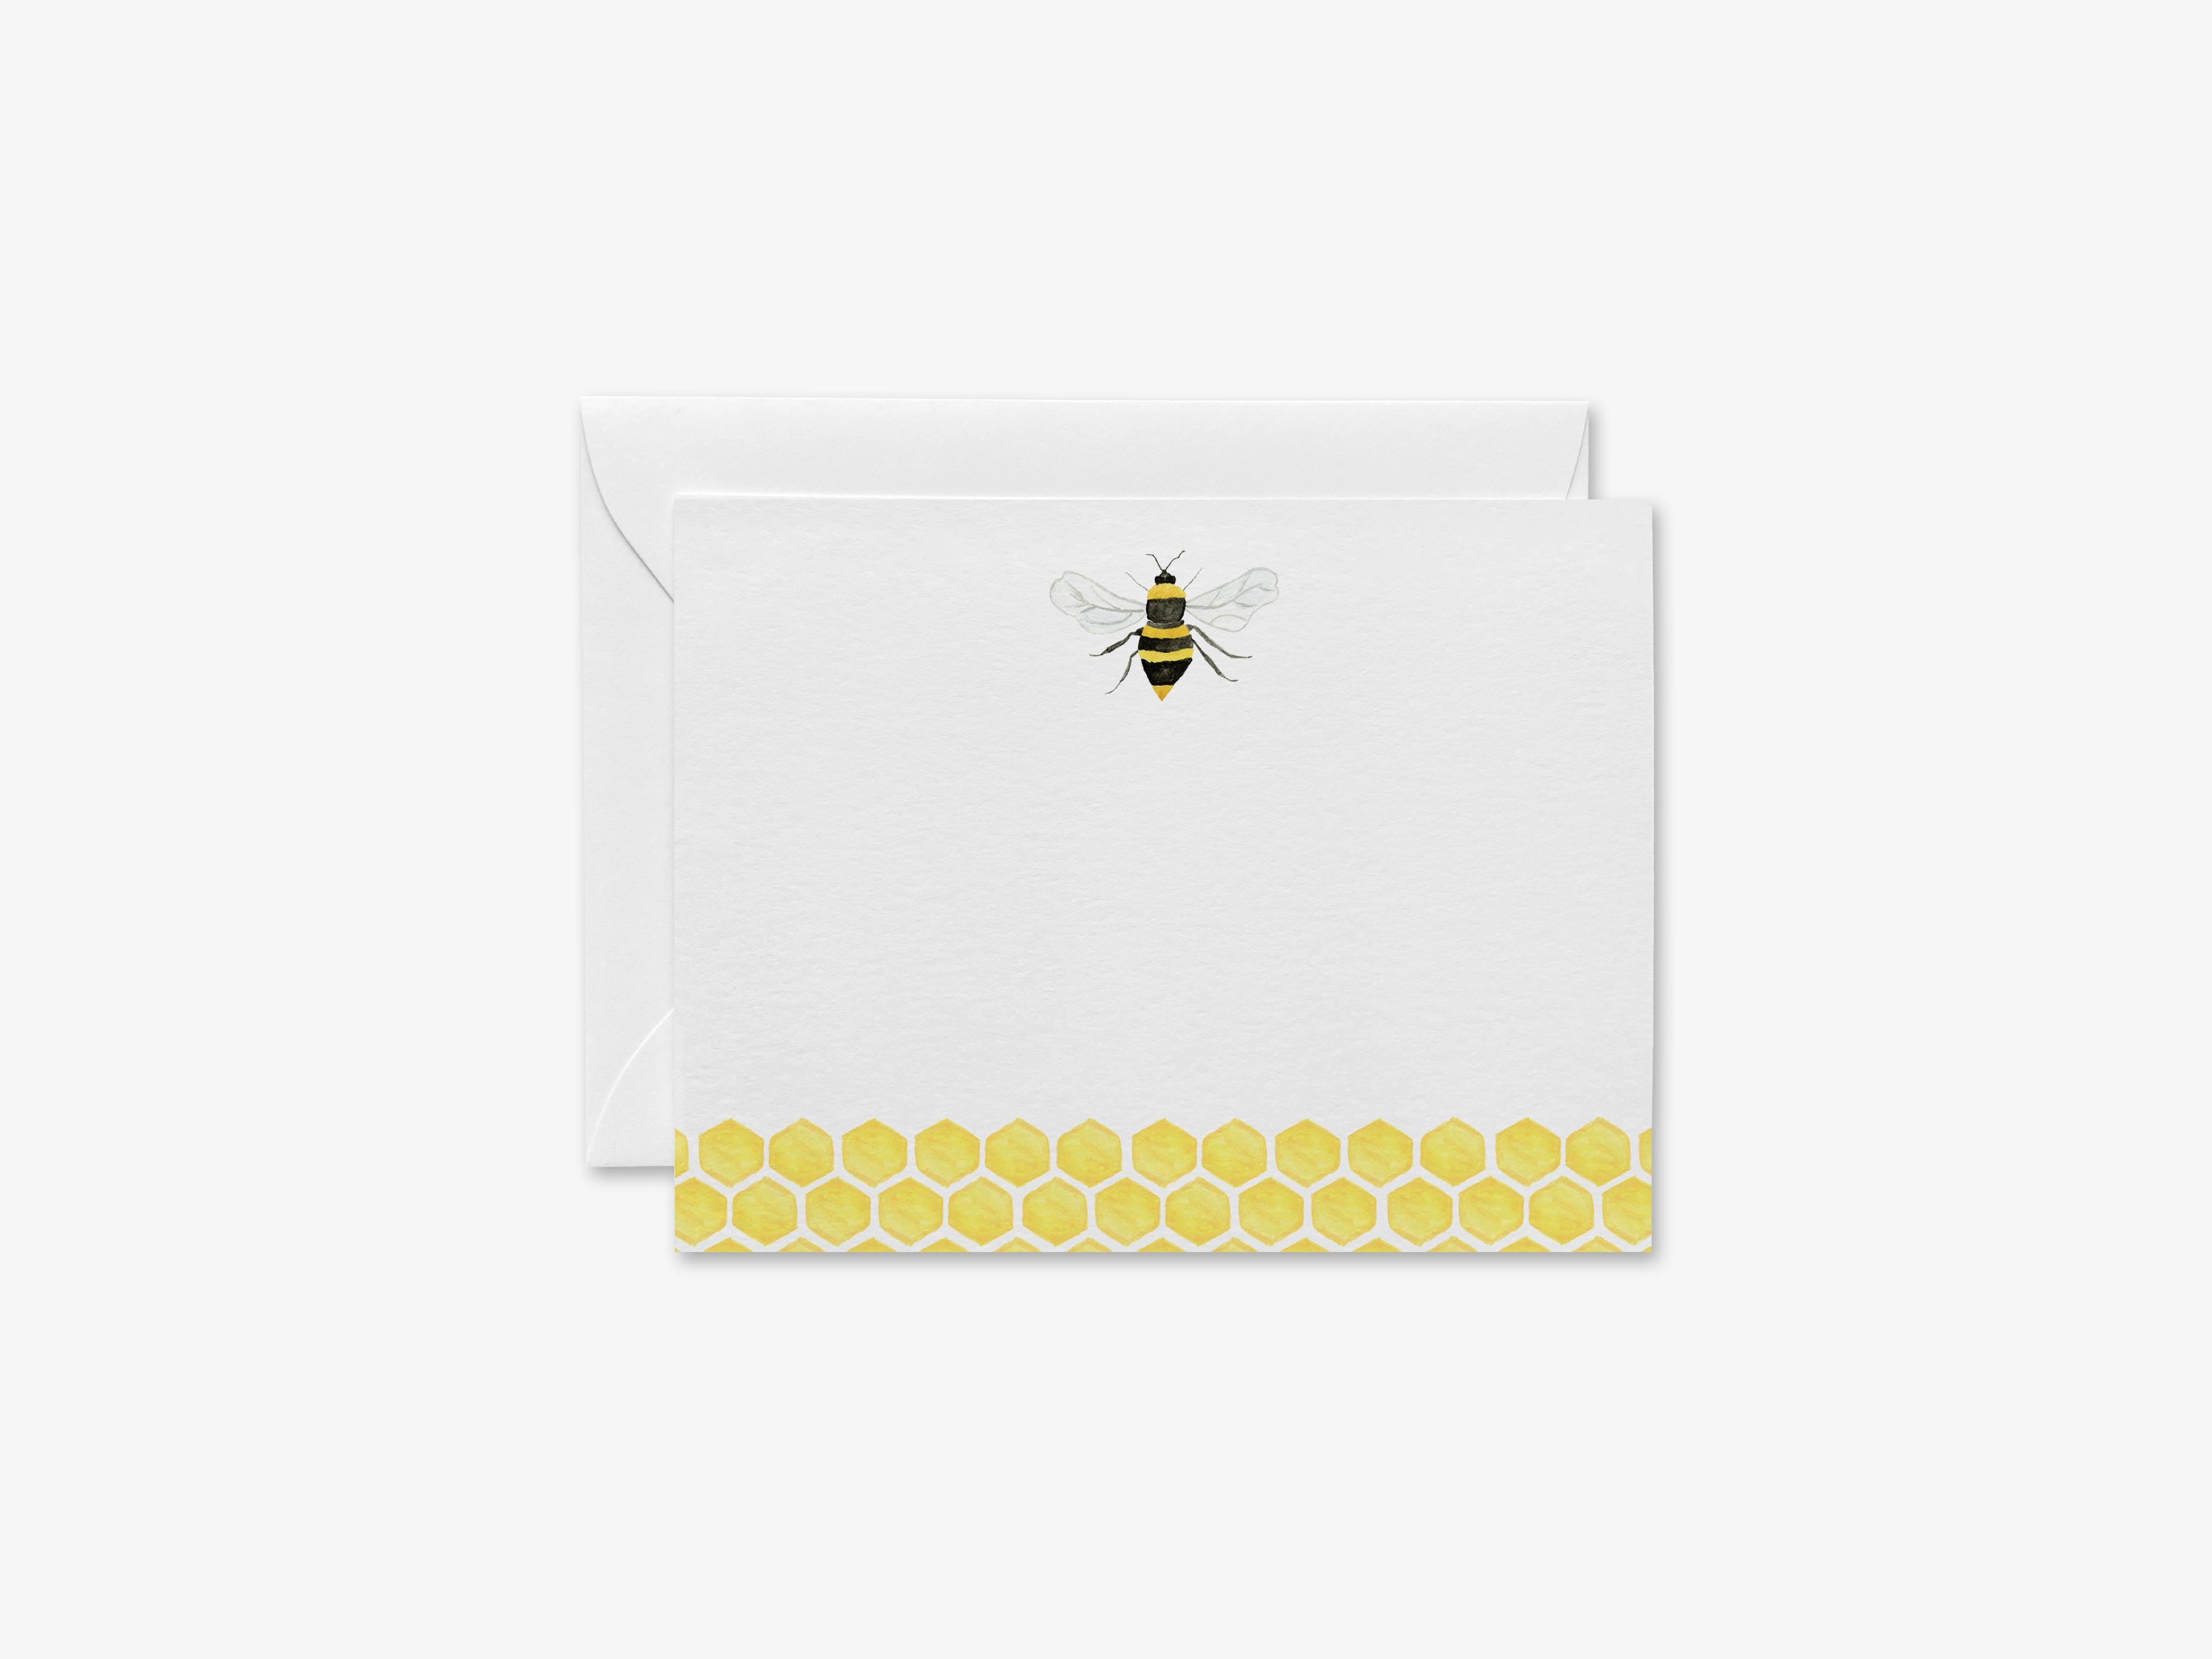 Bee Flat Notes [Sets of 8]-These flat notecards are 4.25x5.5 and feature our hand-painted watercolor Bee, printed in the USA on 120lb textured stock. They come with white envelopes and make great thank yous and gifts for the bee lover in your life.-The Singing Little Bird